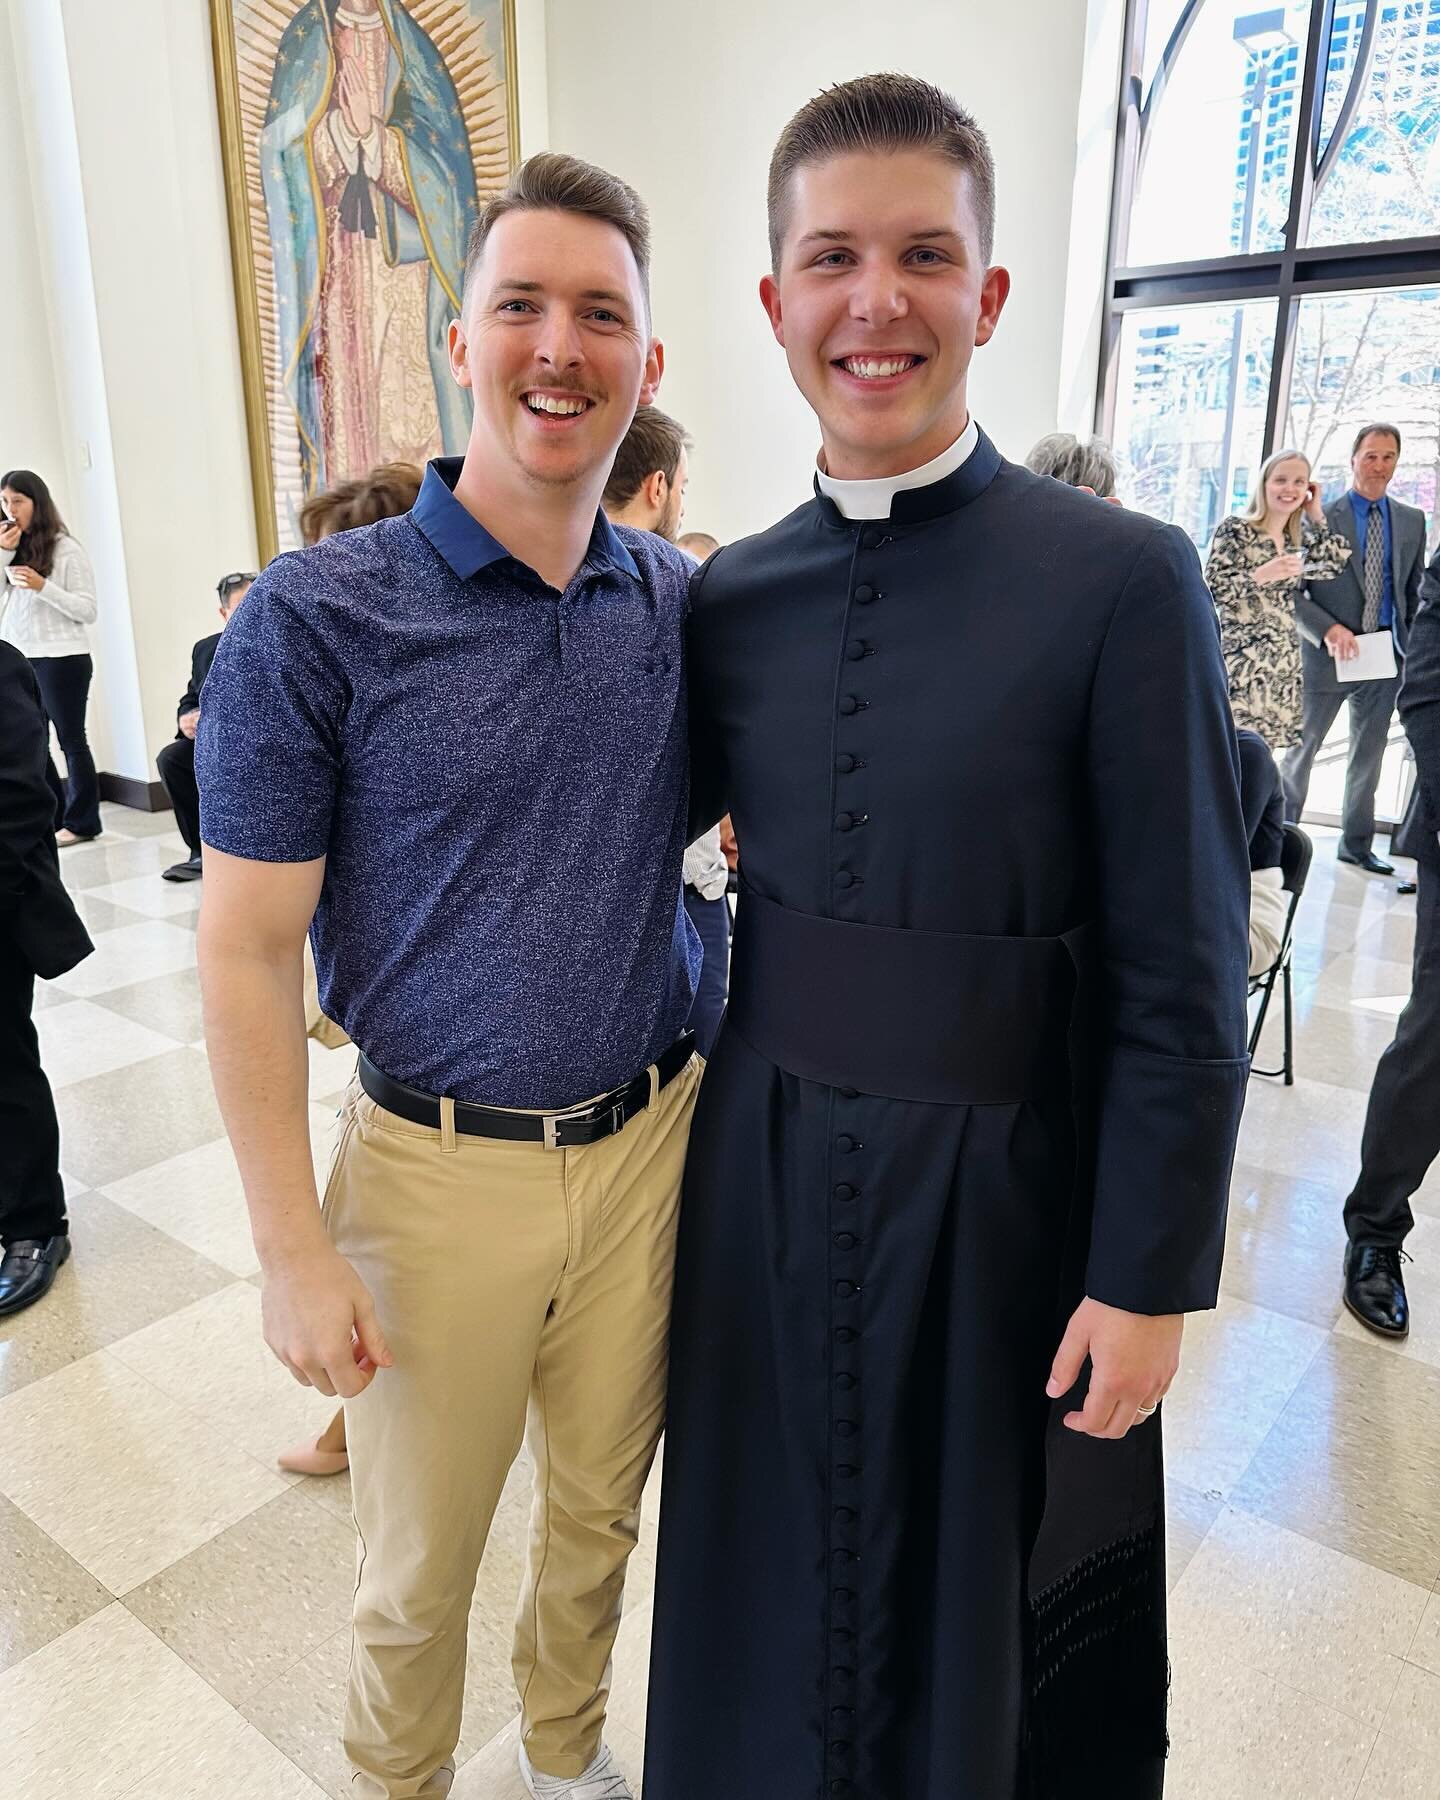 Congratulations, Deacon BRYCE! This morning was a huge milestone for him as he was ordained as a Deacon, one of the final steps before his ordination as a priest. Please pray for him as he makes this awesome transition. We&rsquo;re so proud of you! ?